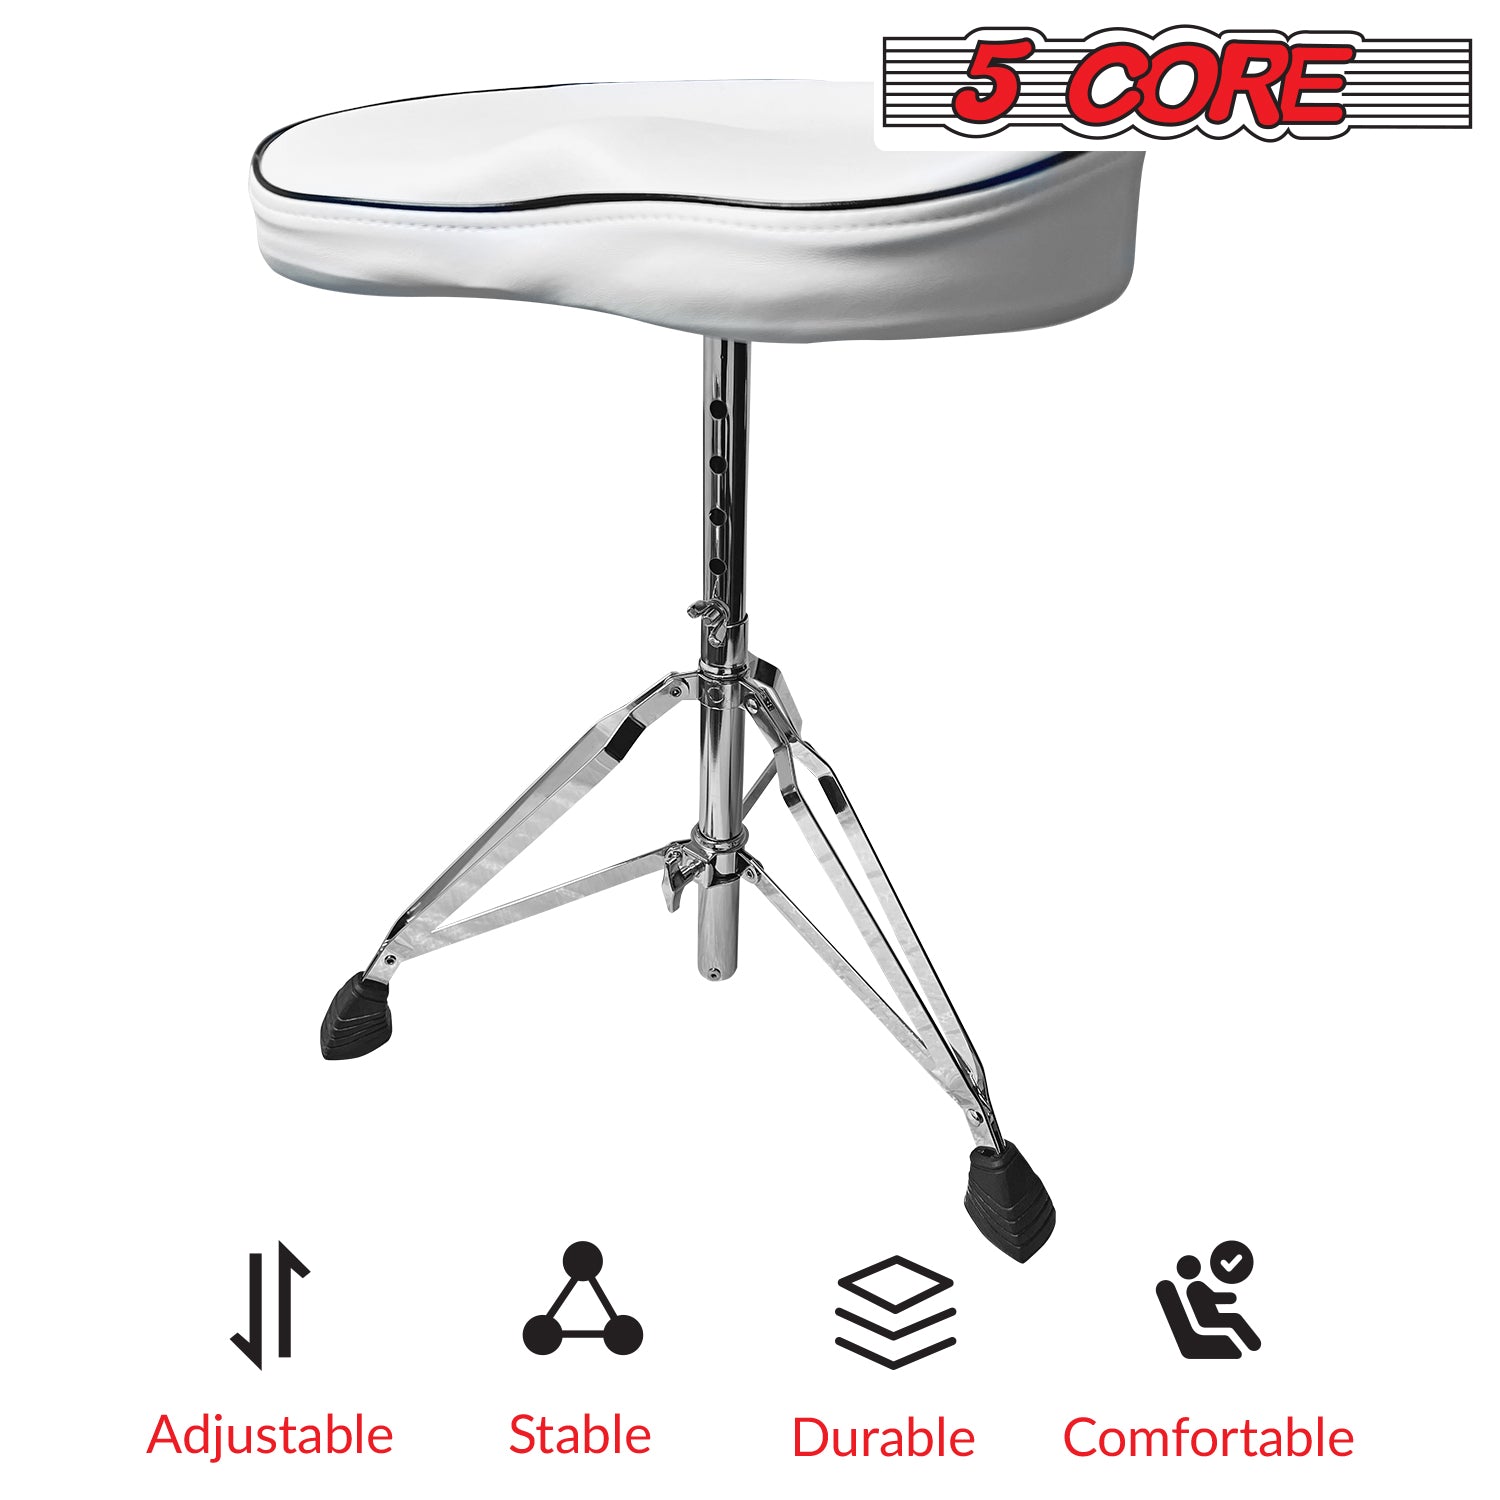 5 Core Drum Throne Thick Padded Comfortable Guitar Stool with Memory Foam Adjustable Padded Keyboard Chair Metal Piano Stool Premium Musician Chair White - DS CH BR SDL